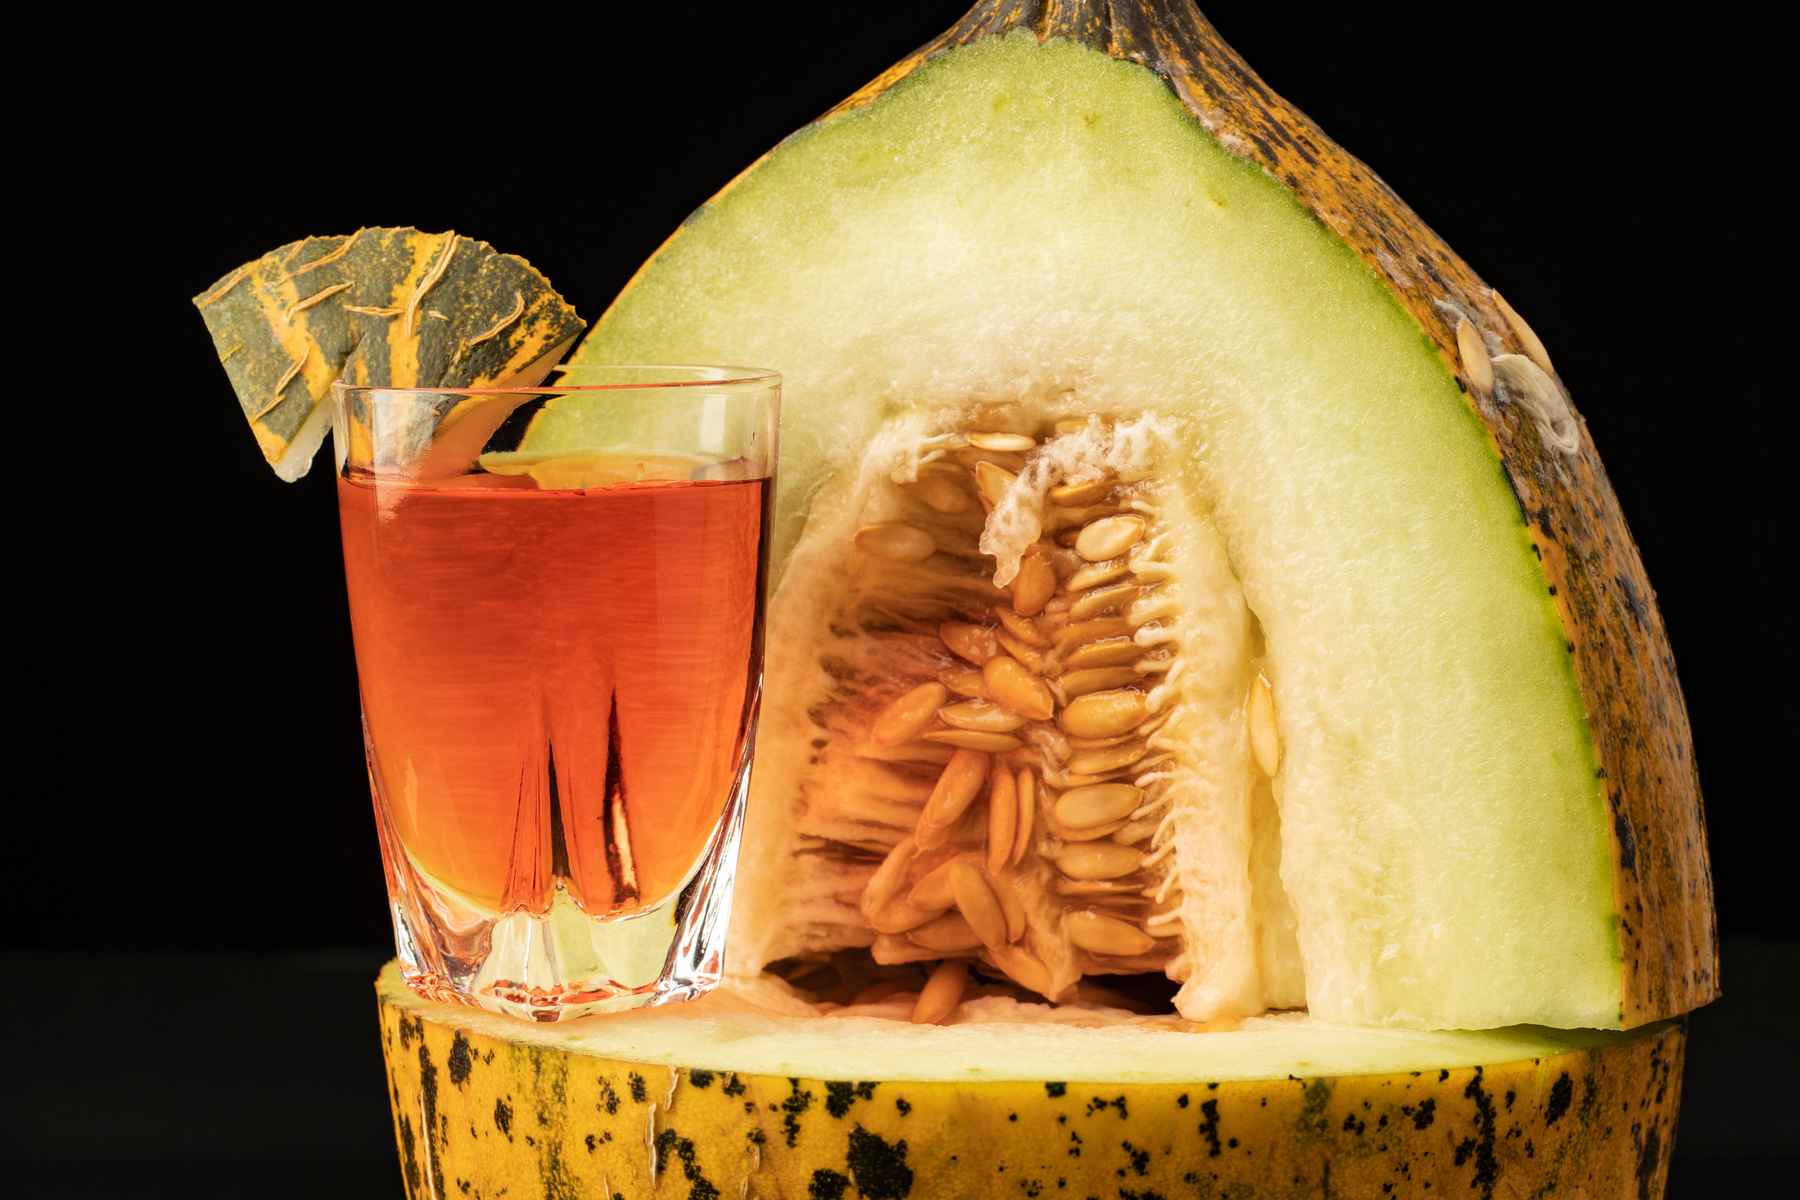 Glass of amber colored flavored spirits next to a melon half and garnished with a piece of melon peel.